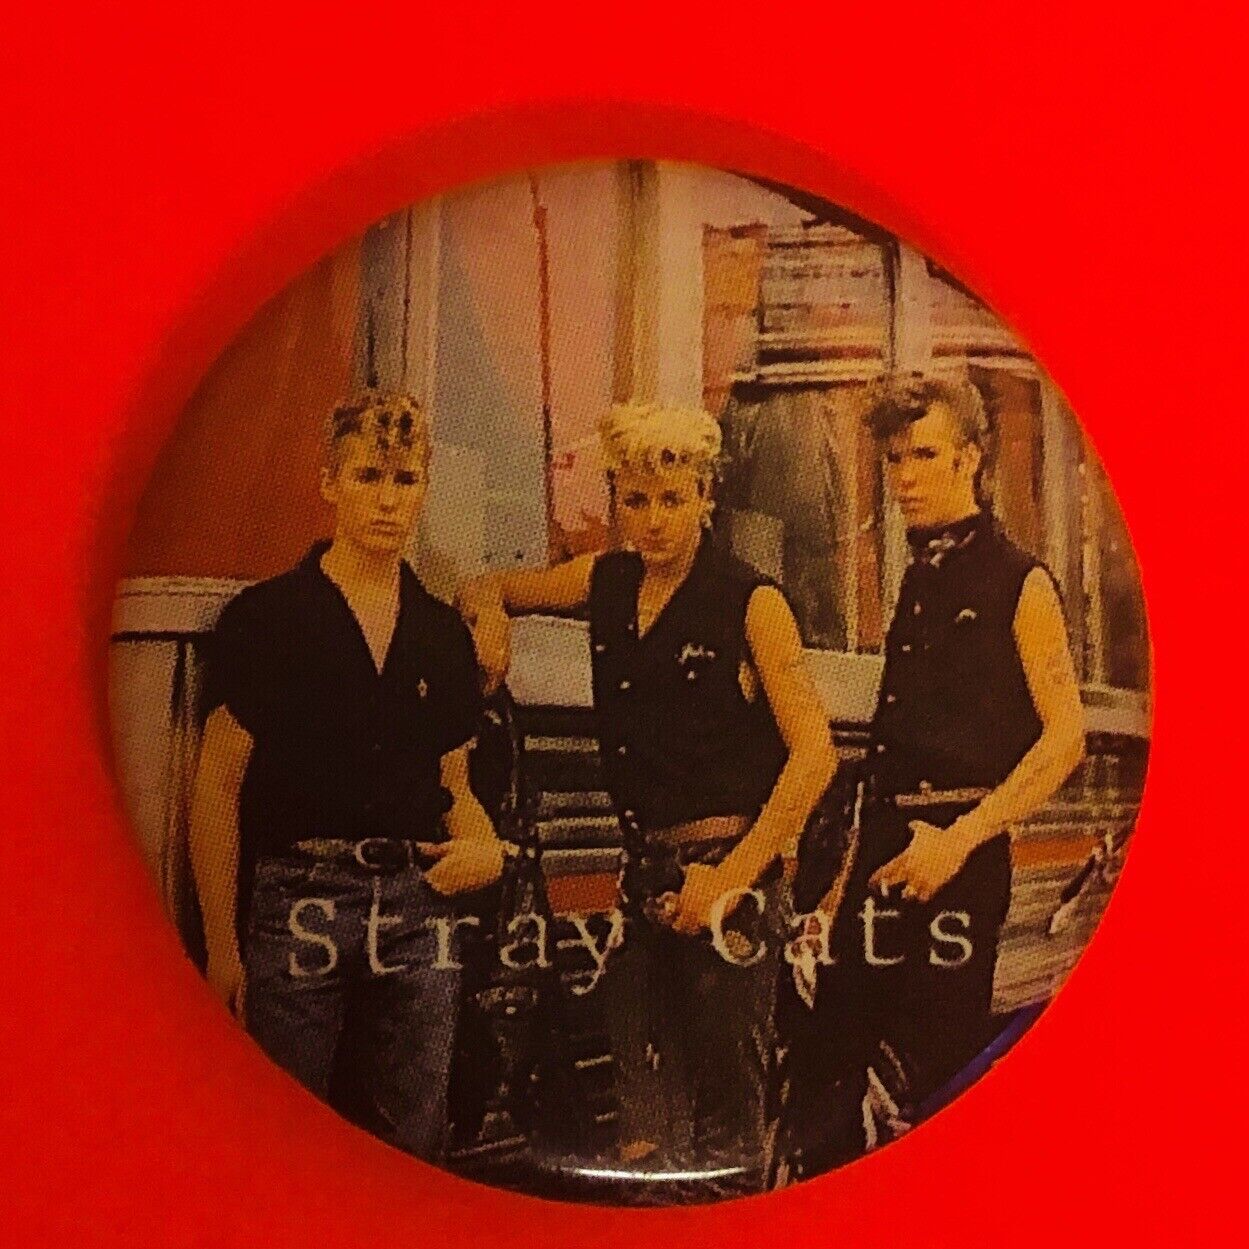 STRAY CATS band Pin VINTAGE 80s Pinback Button Rockabilly Rock Badge 1980s